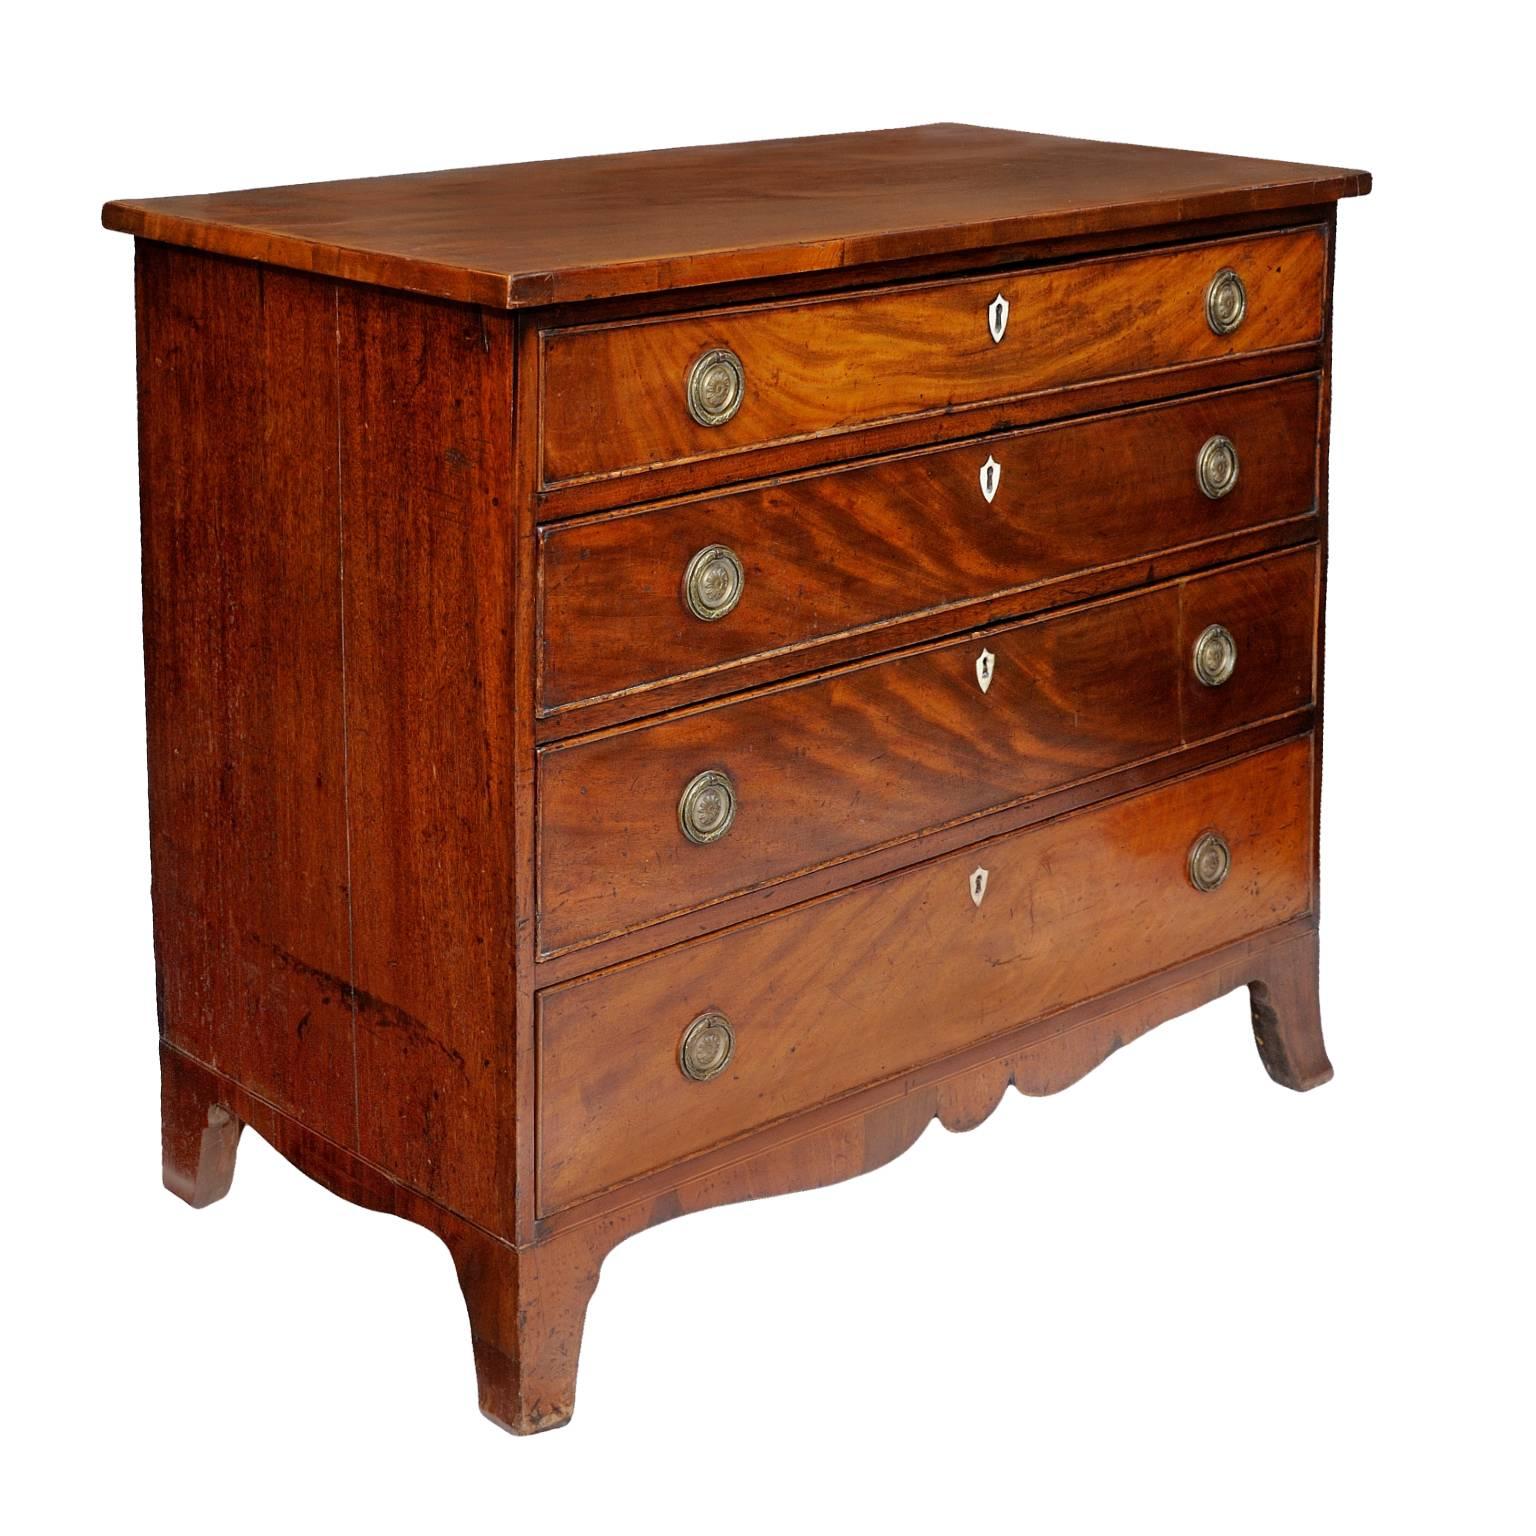 This is a lovely English early 19th century Regency mahogany chest of drawers with beautiful figuring to the woodwork.

With oak drawer linings, in original country house condition, circa 1810.

